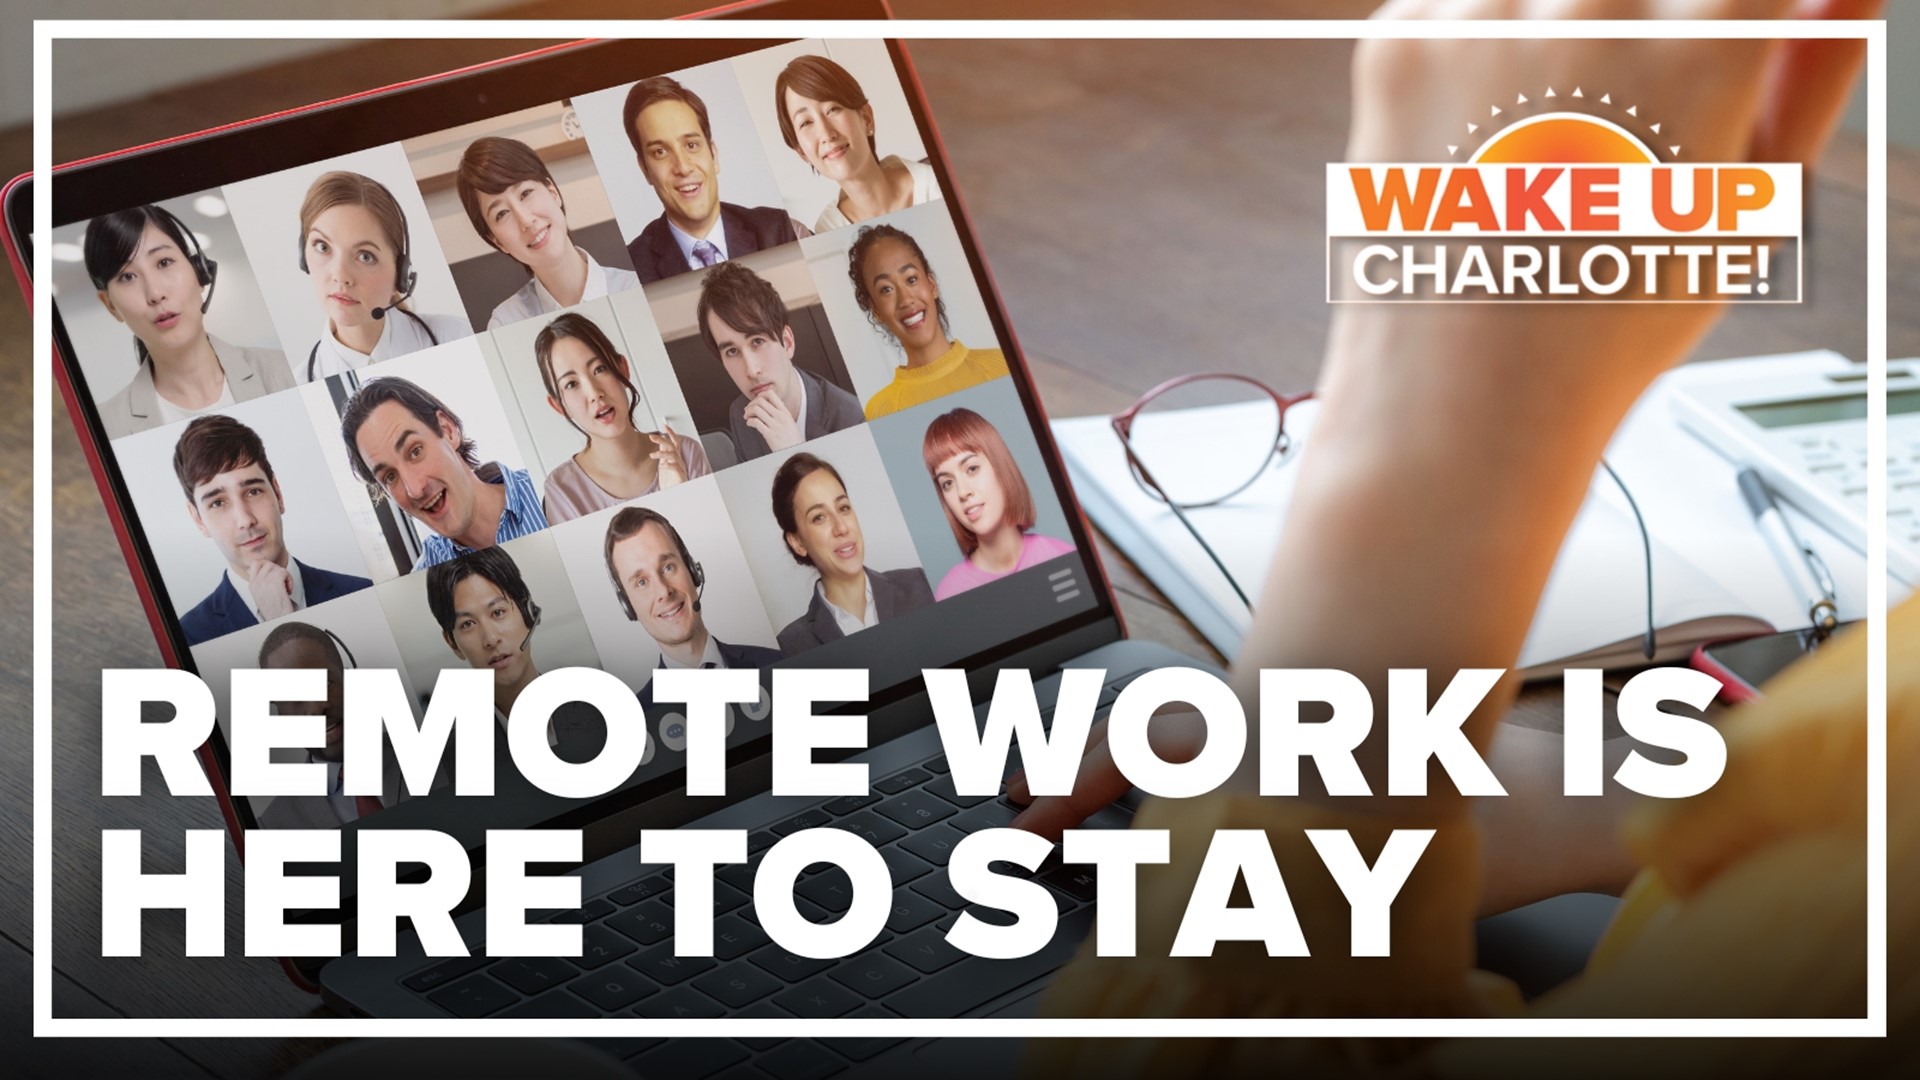 While most major companies have been pushing to get folks back in the office, experts say the benefits of remote work are "pretty substantial."